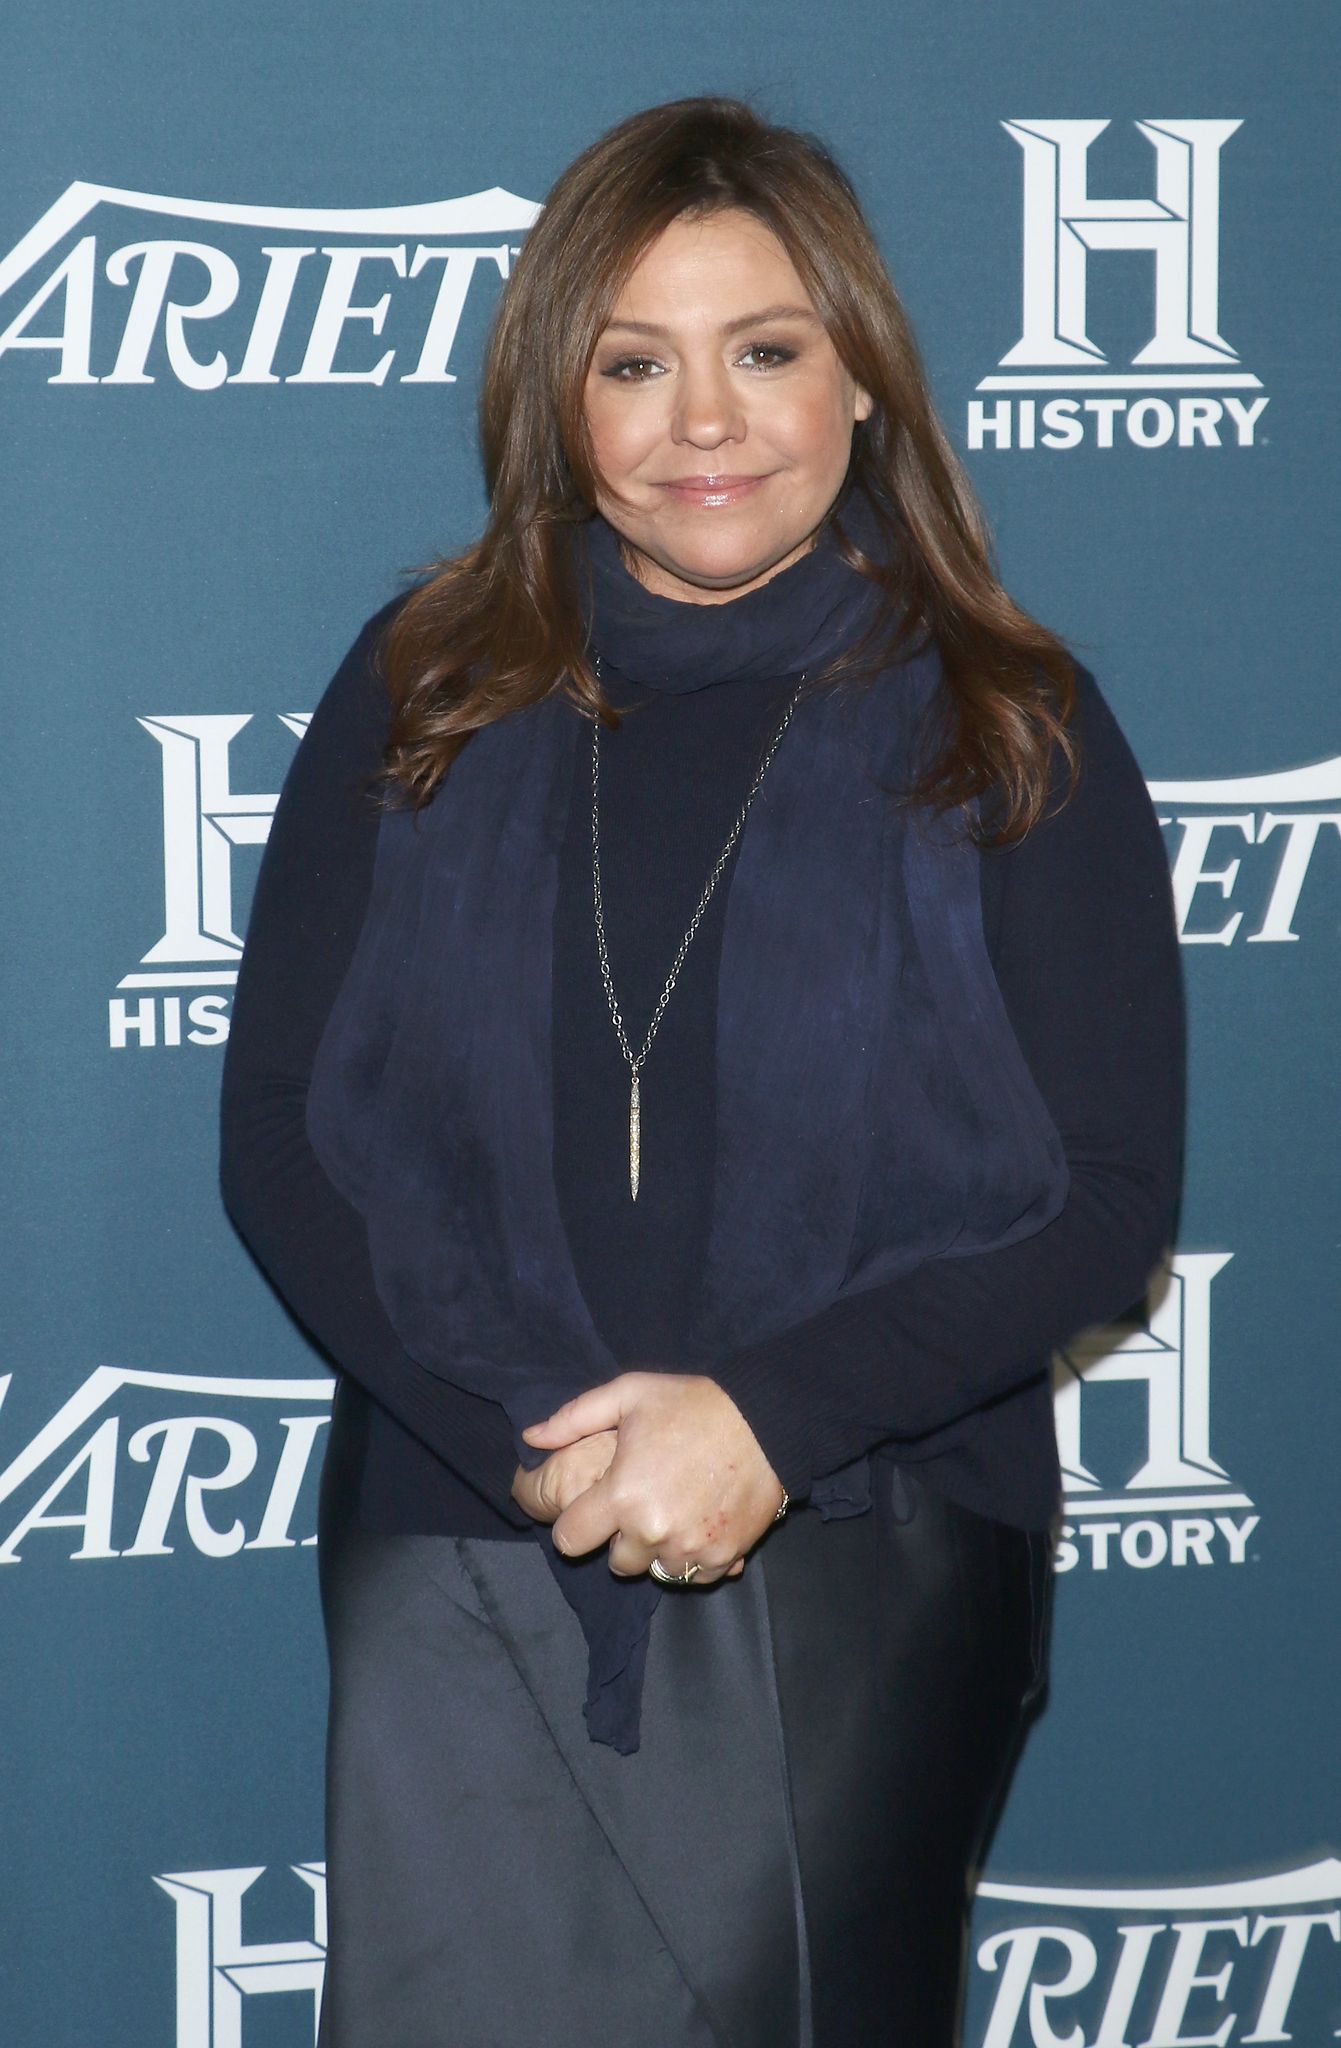 Rachael Ray at Cipriani Downtown on November 12, 2018 in New York City. | Photo: Getty Images